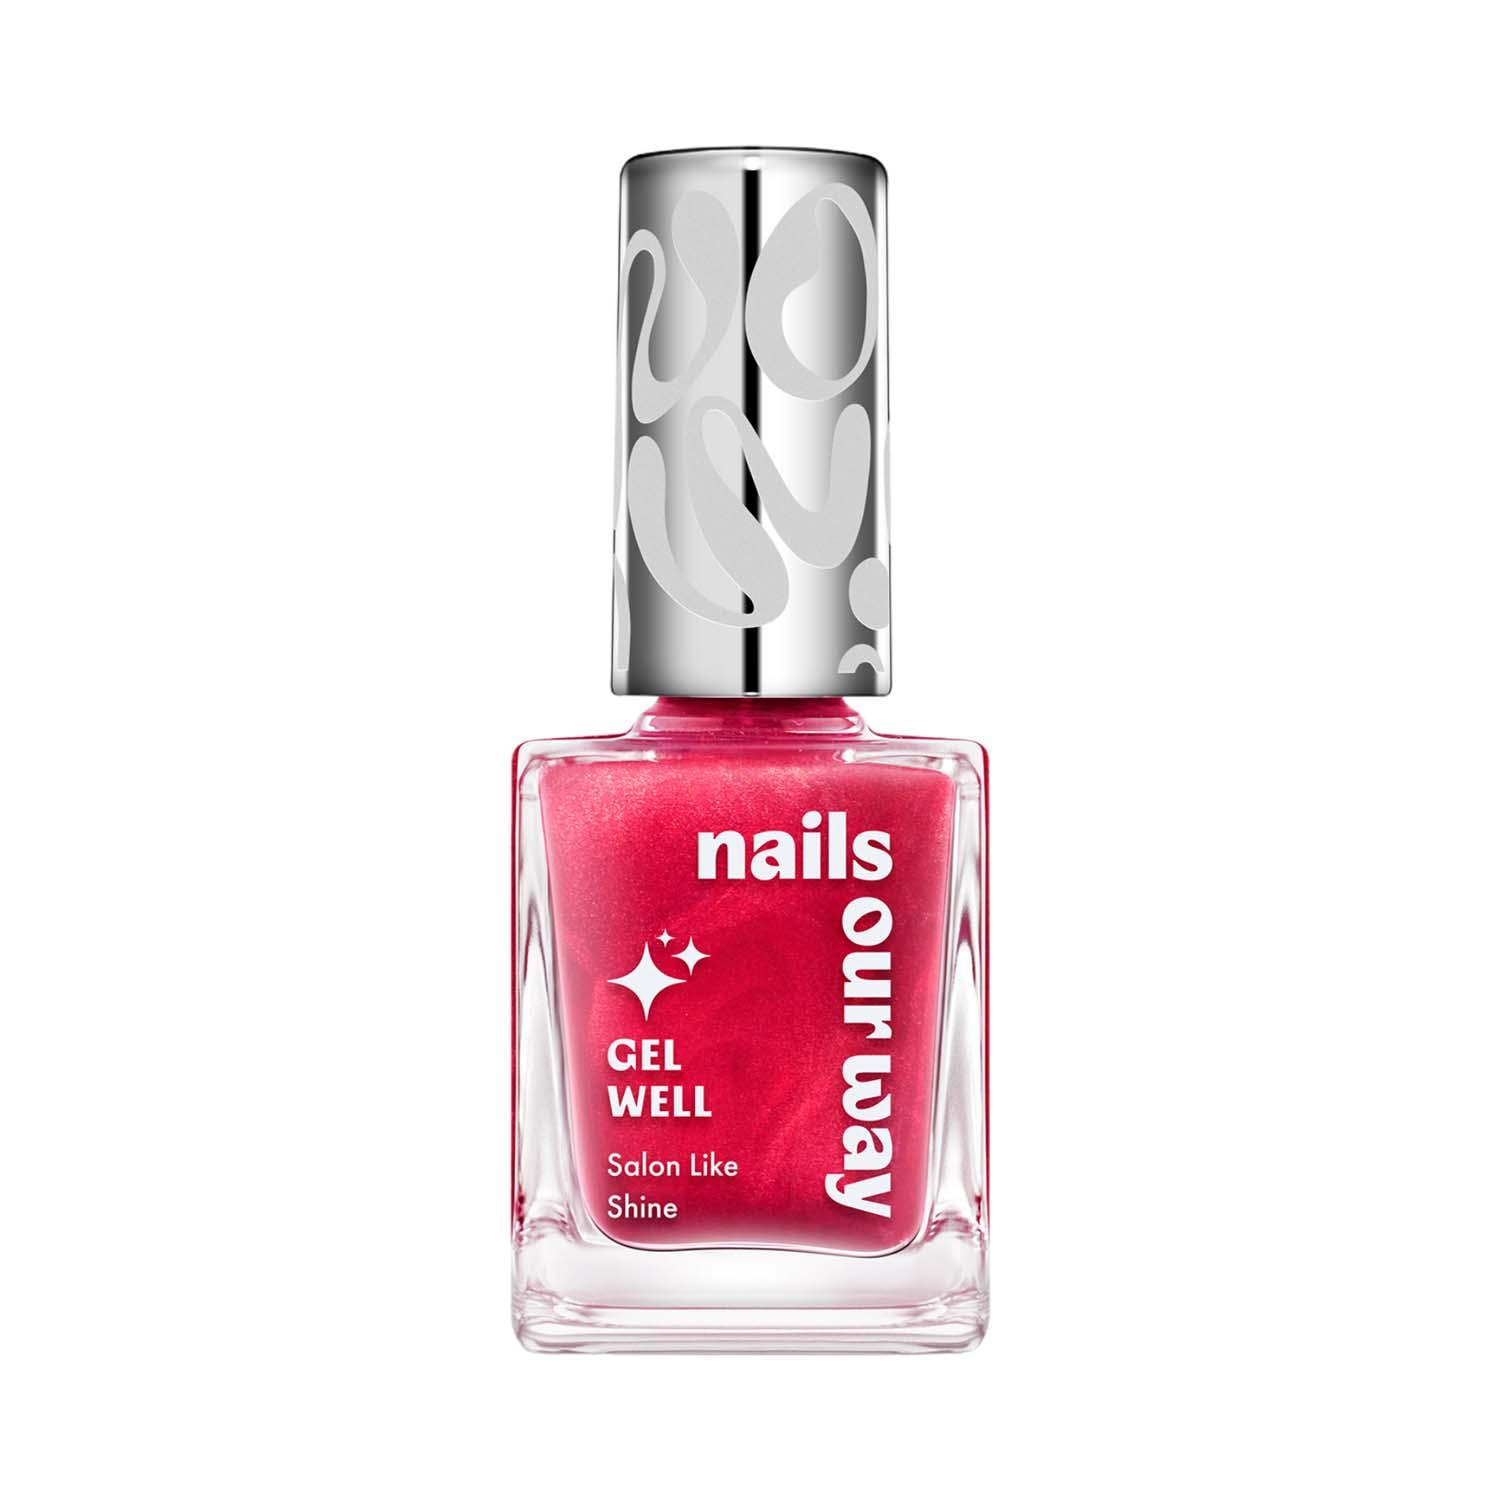 Nails Our Way | Nails Our Way Gel Well Nail Enamel - 210 Daring (10 ml)